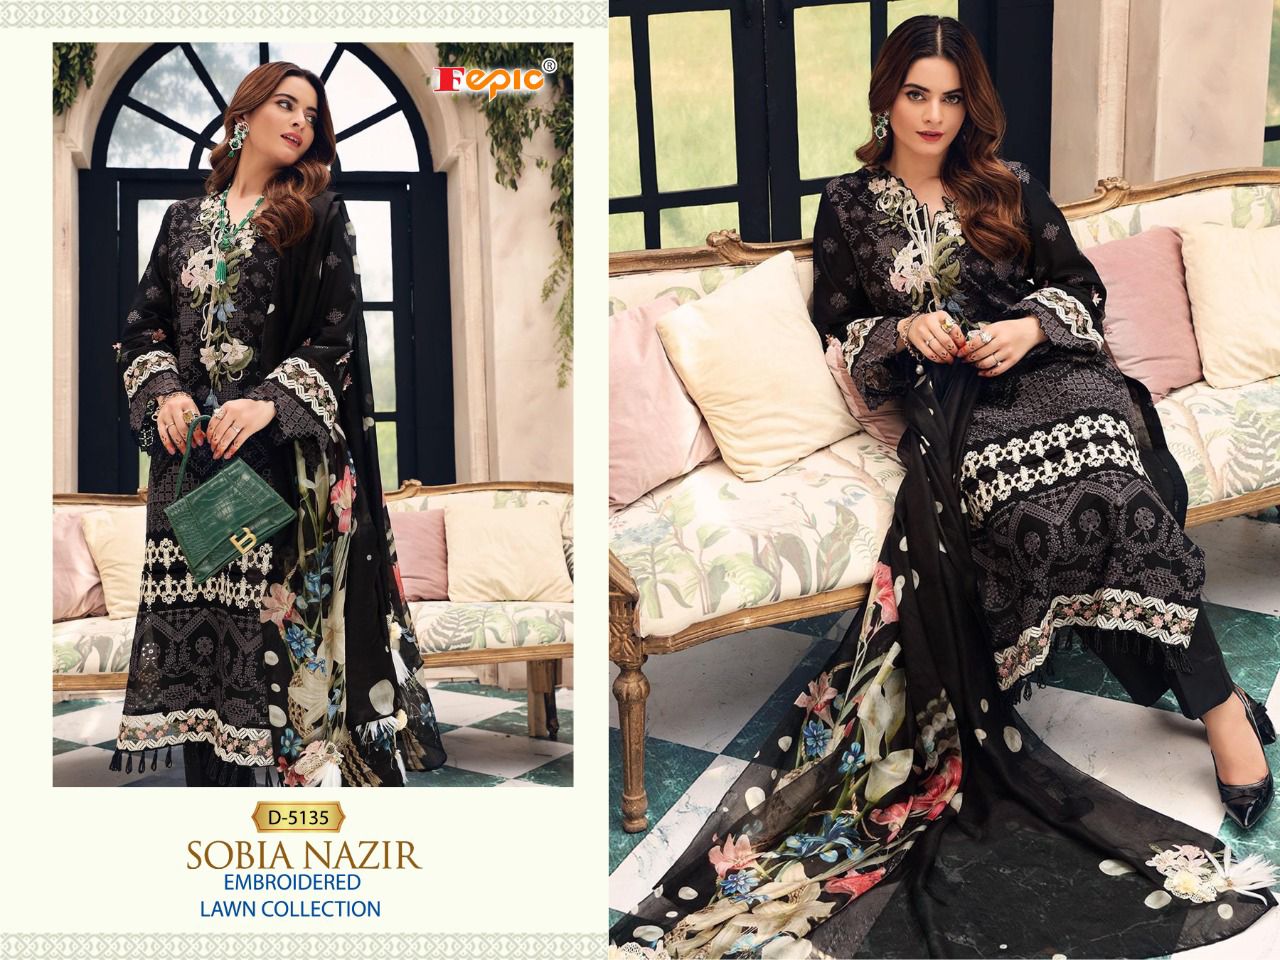 Fepic Rosemeen Sobia Nazir Lawn Collection 5135